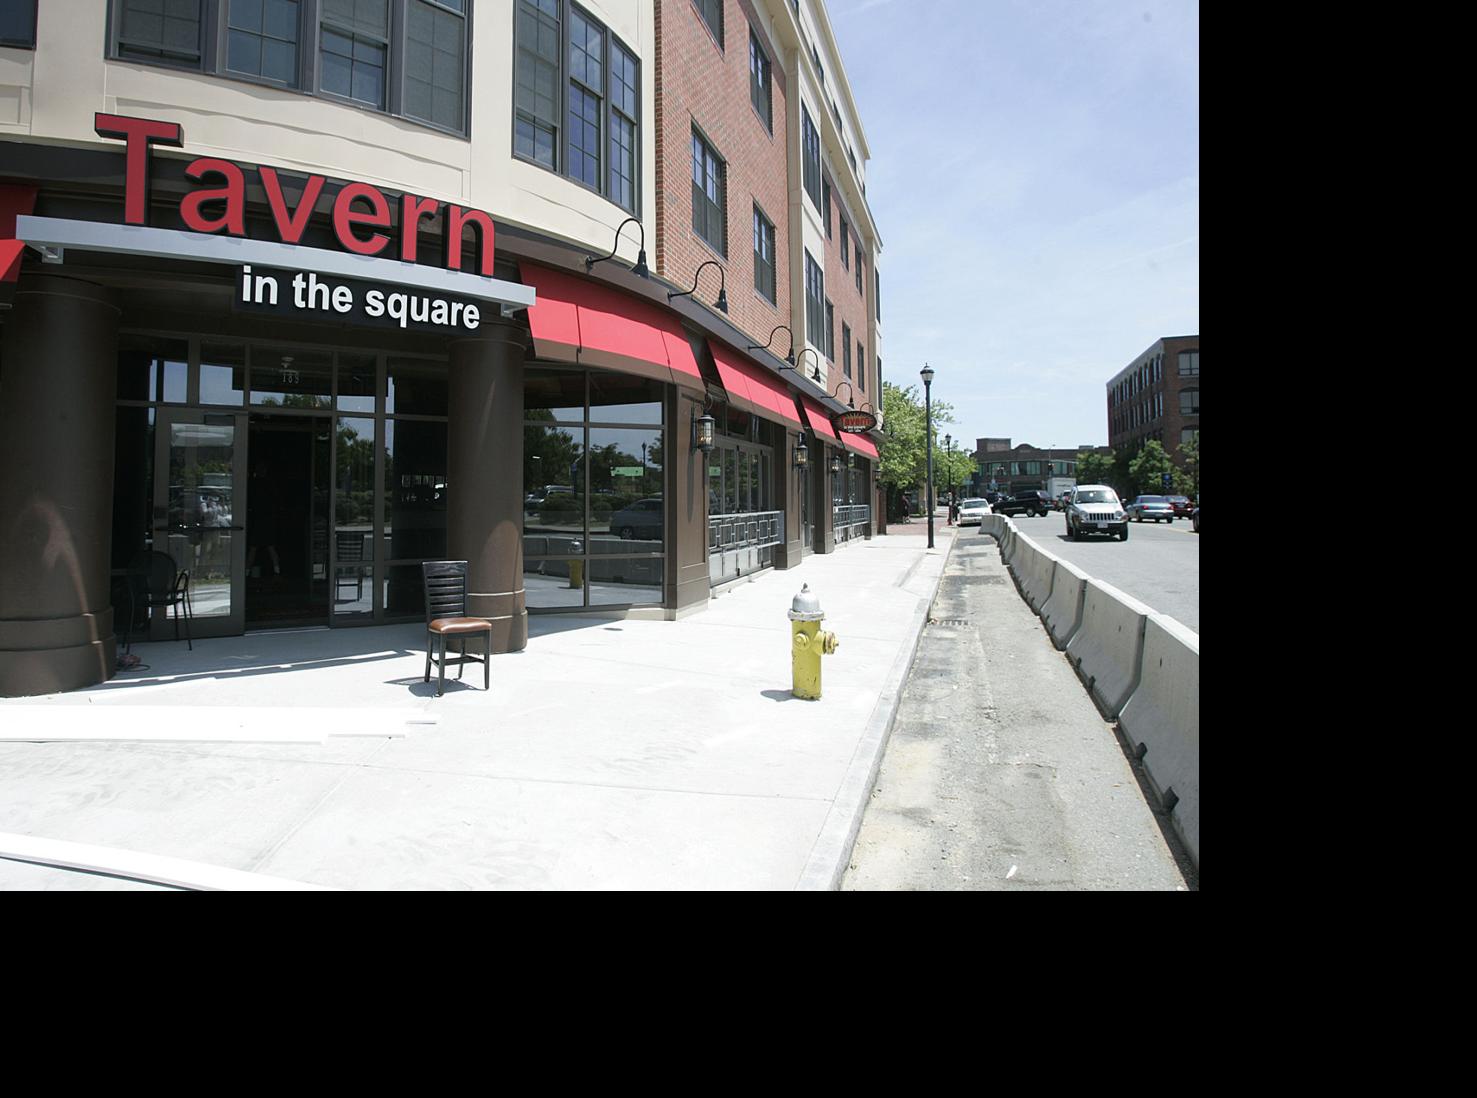 Tavern in the Square faces 30 day suspension Local News salemnews com